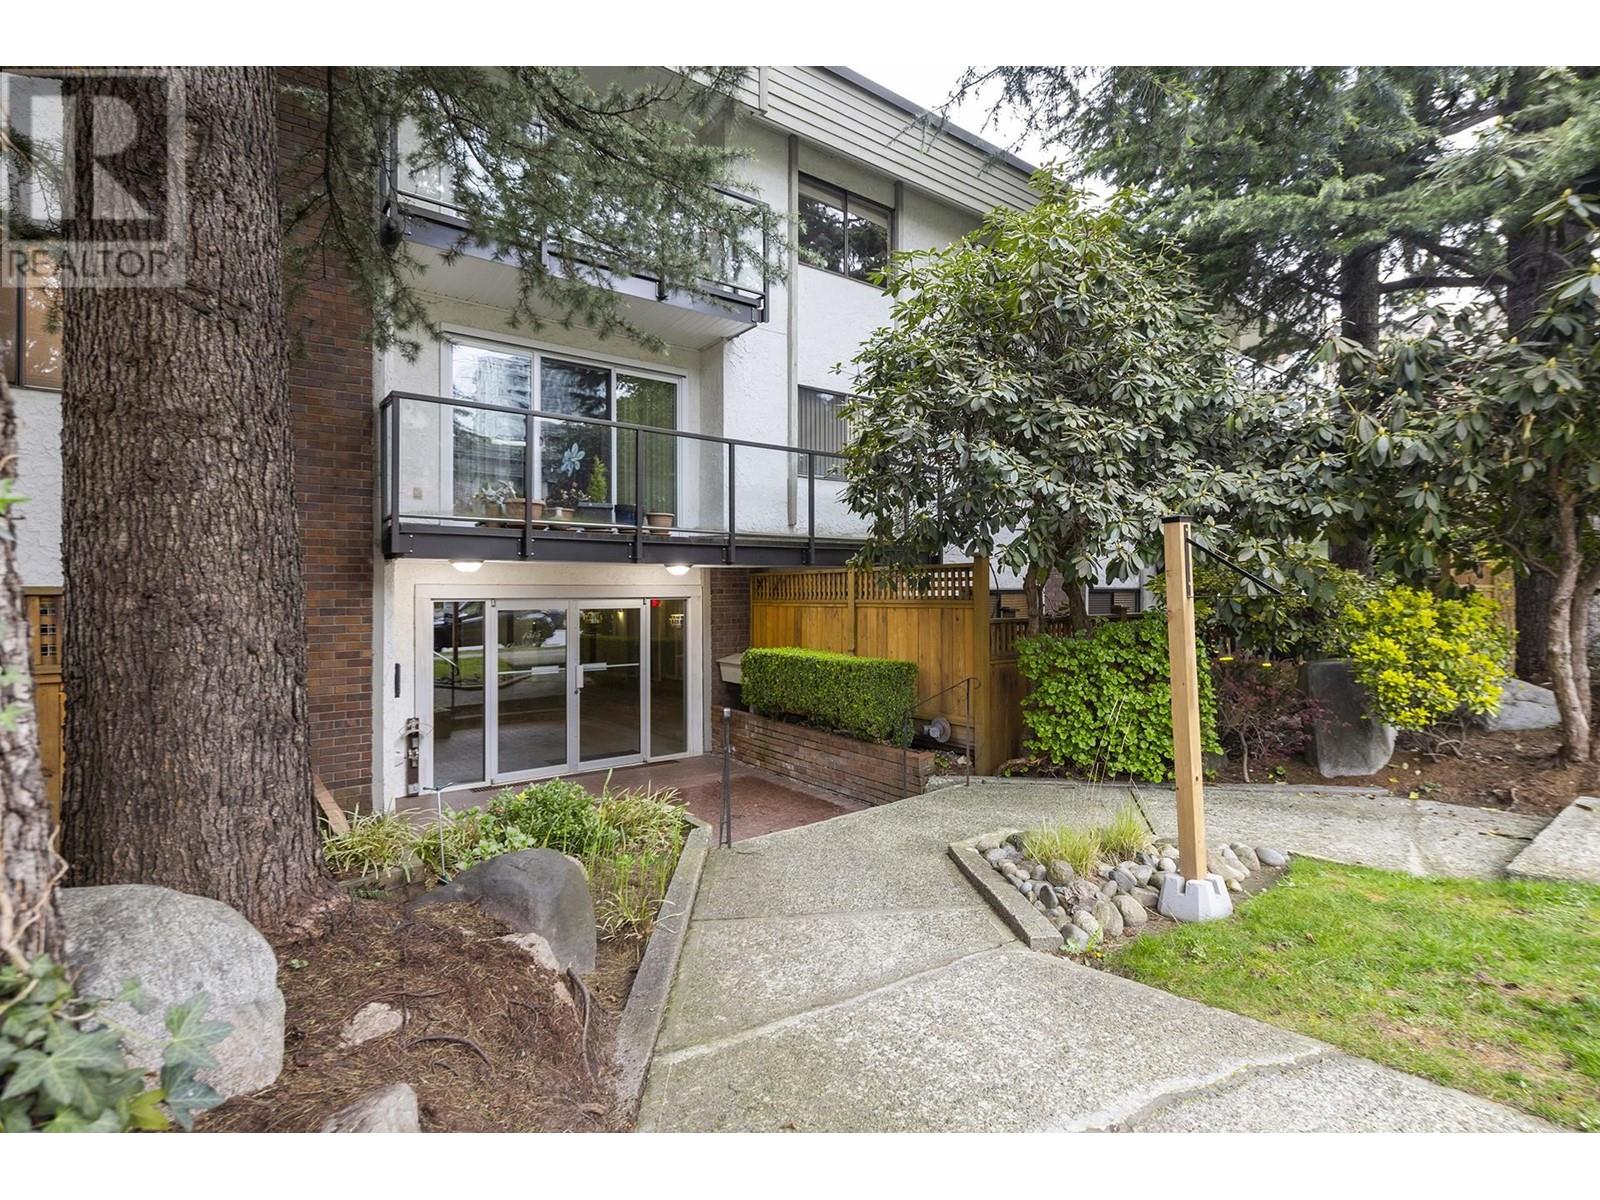 302 1515 CHESTERFIELD AVENUE, north vancouver, British Columbia V7M2N5